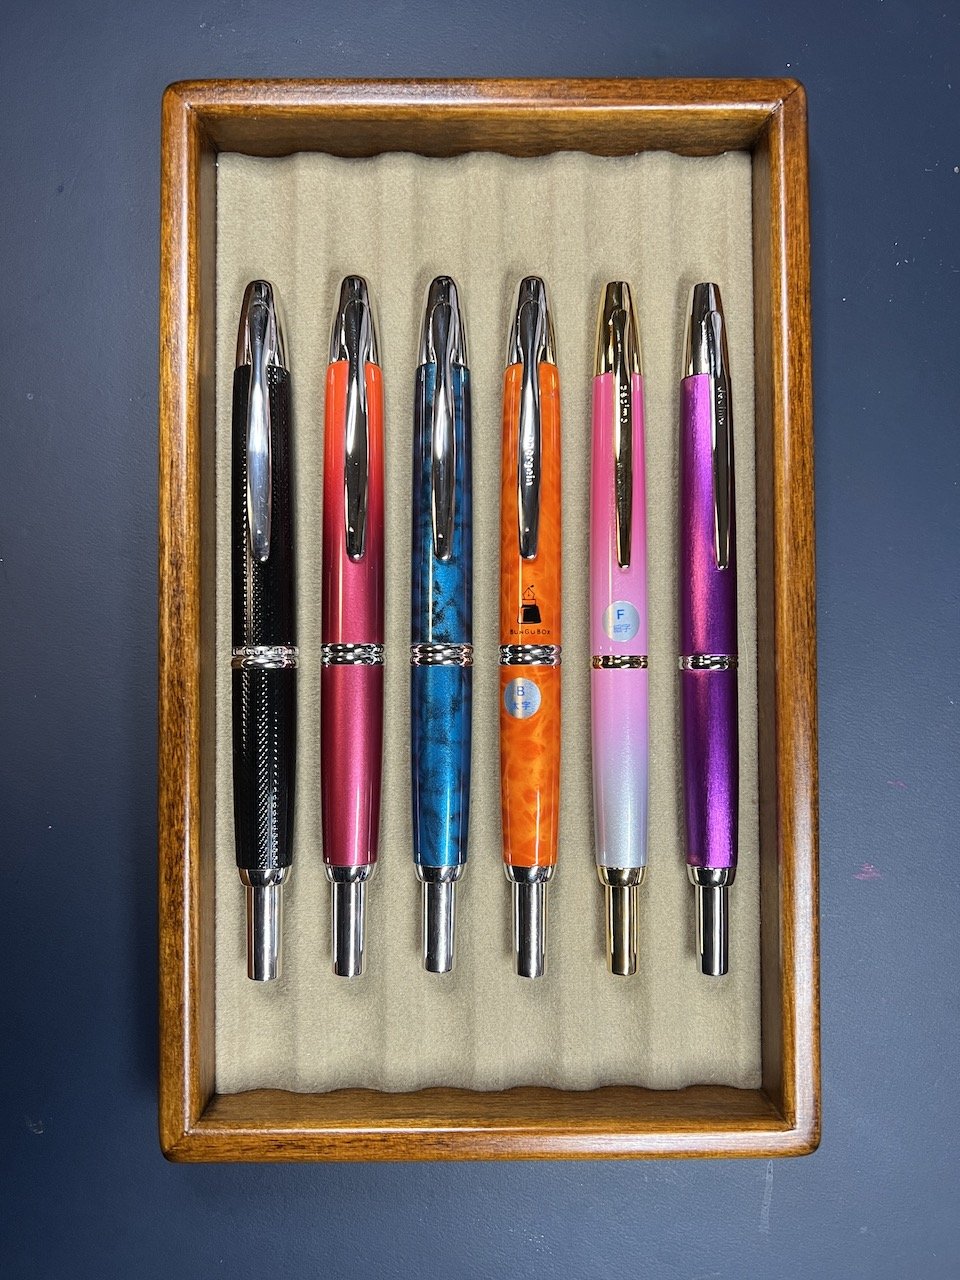 NEW 2019 LIMITED EDITION Tul Metallic Pens Review